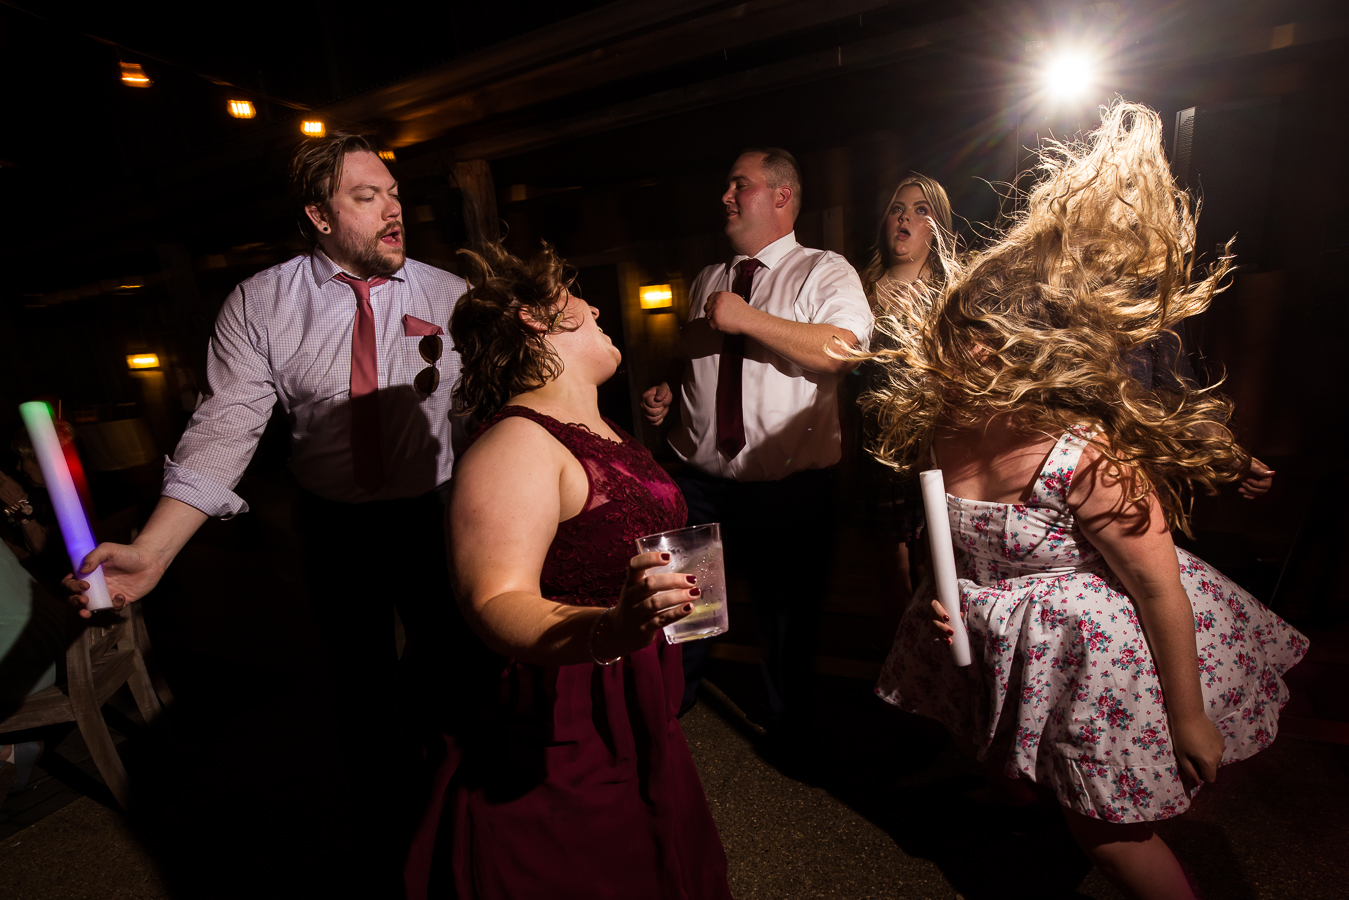 creative, fun Oak Lodge wedding reception photographer, rhinehart photography, captures this unique, fun image of guests as they dance together and their hair is flying through the air as they dance with their colorful giant glowsticks